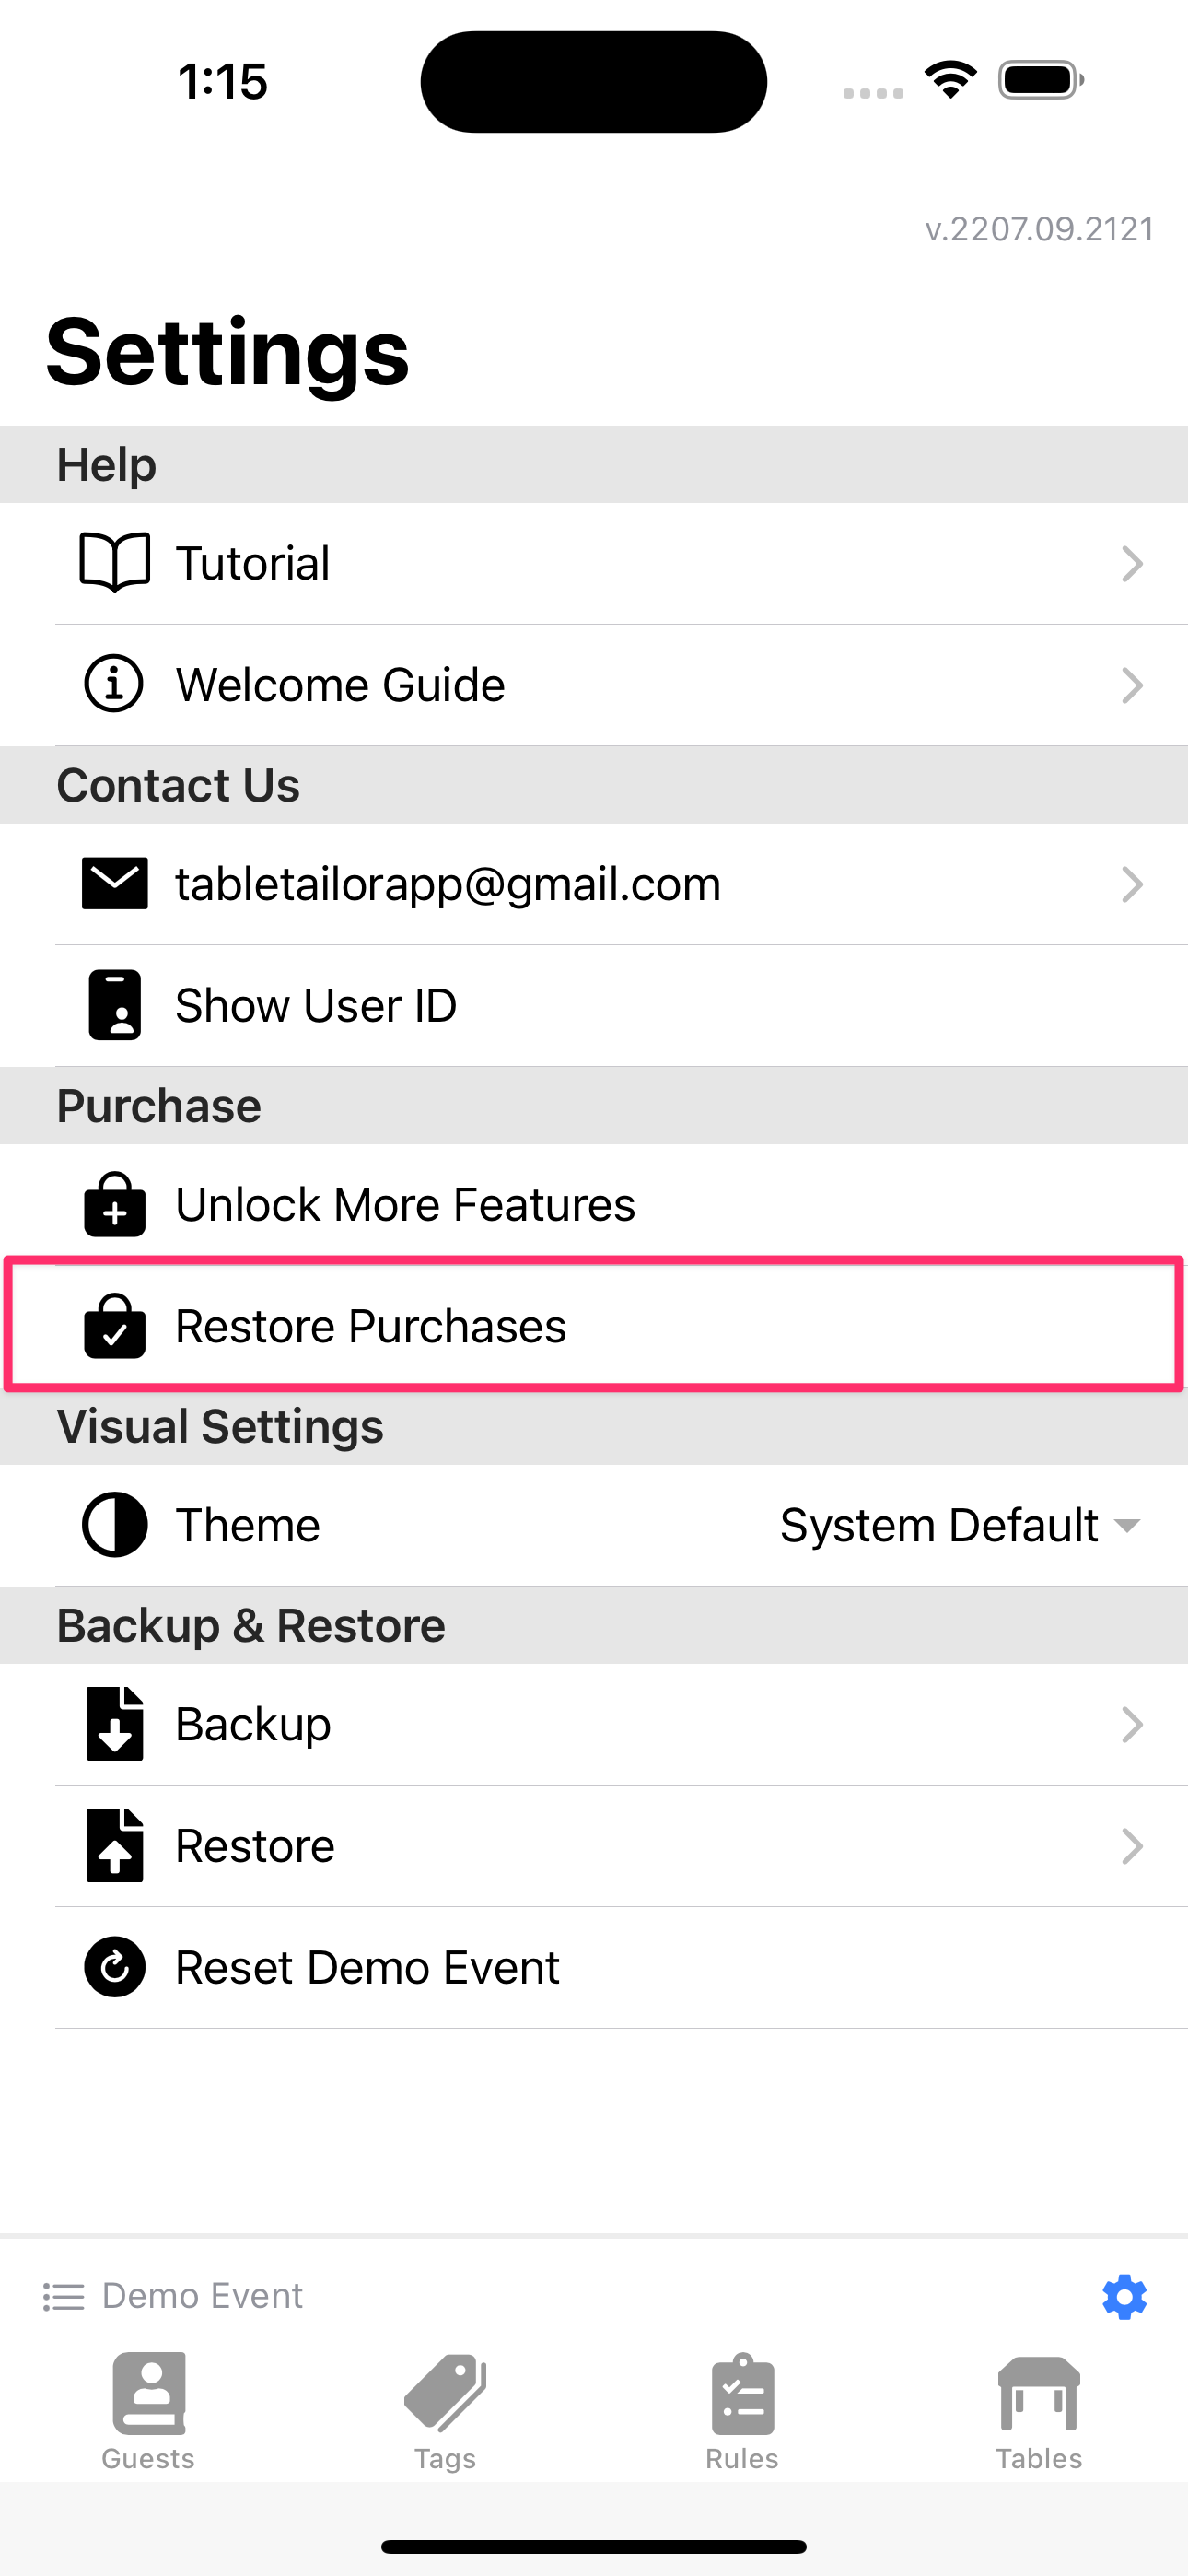 Restore purchases